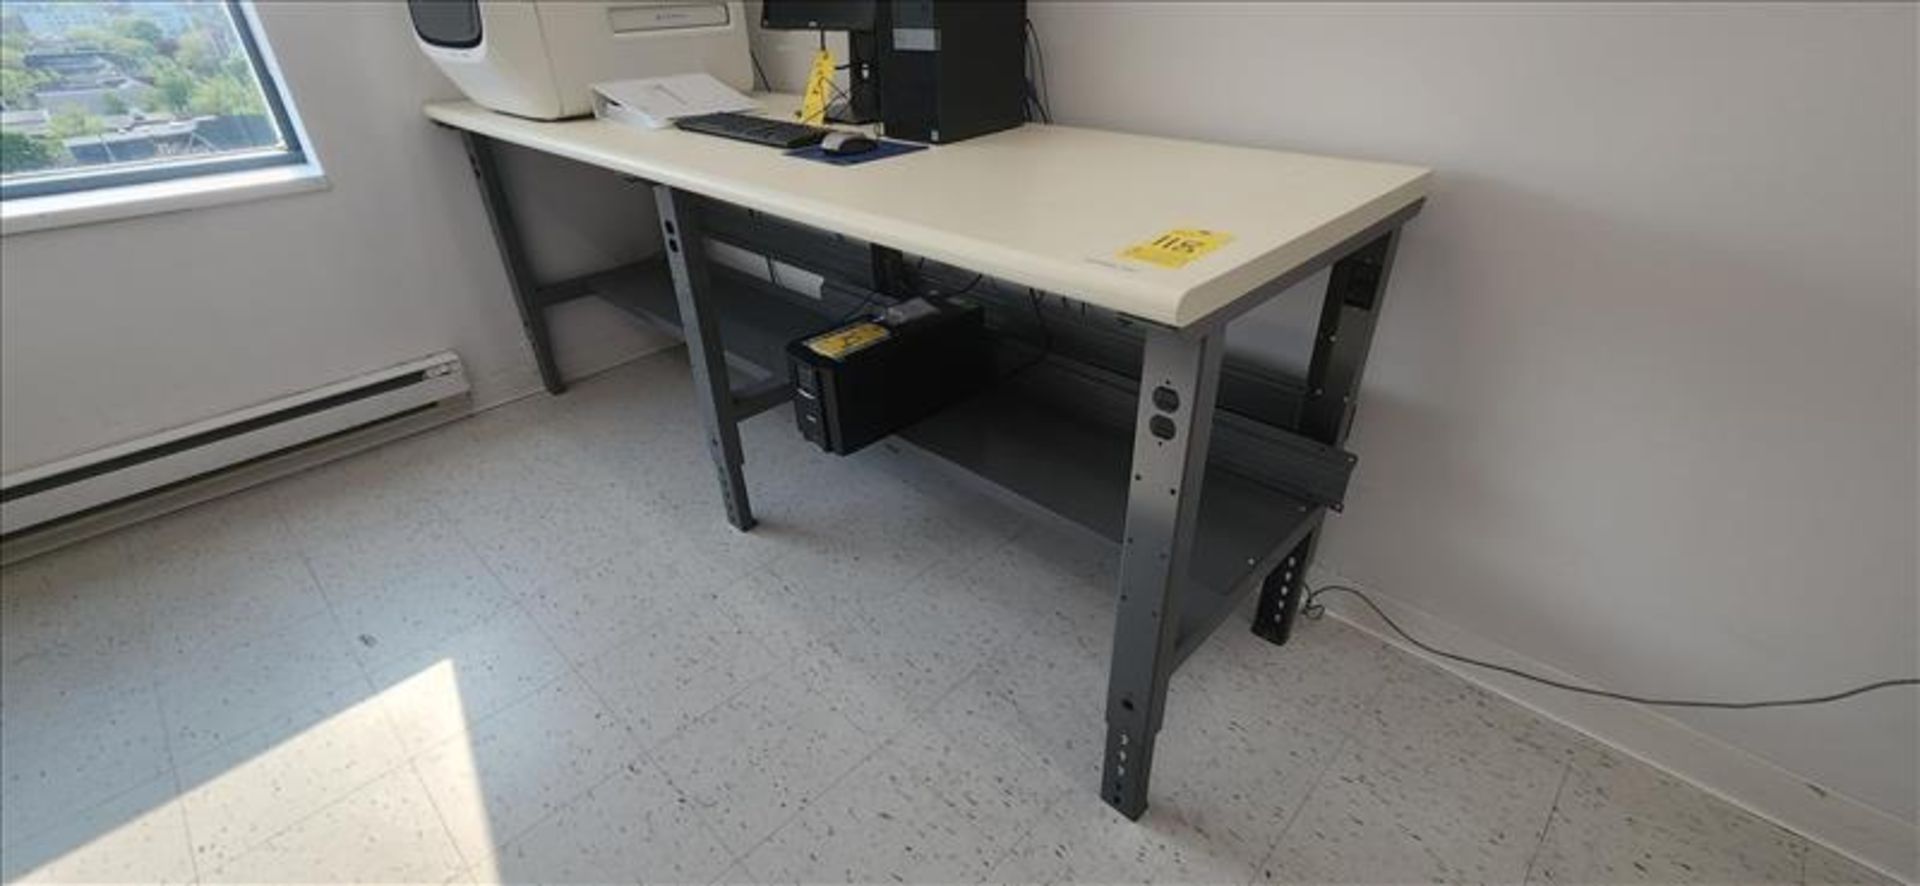 Uline Work Bench approx. 30 in. x 96 in.